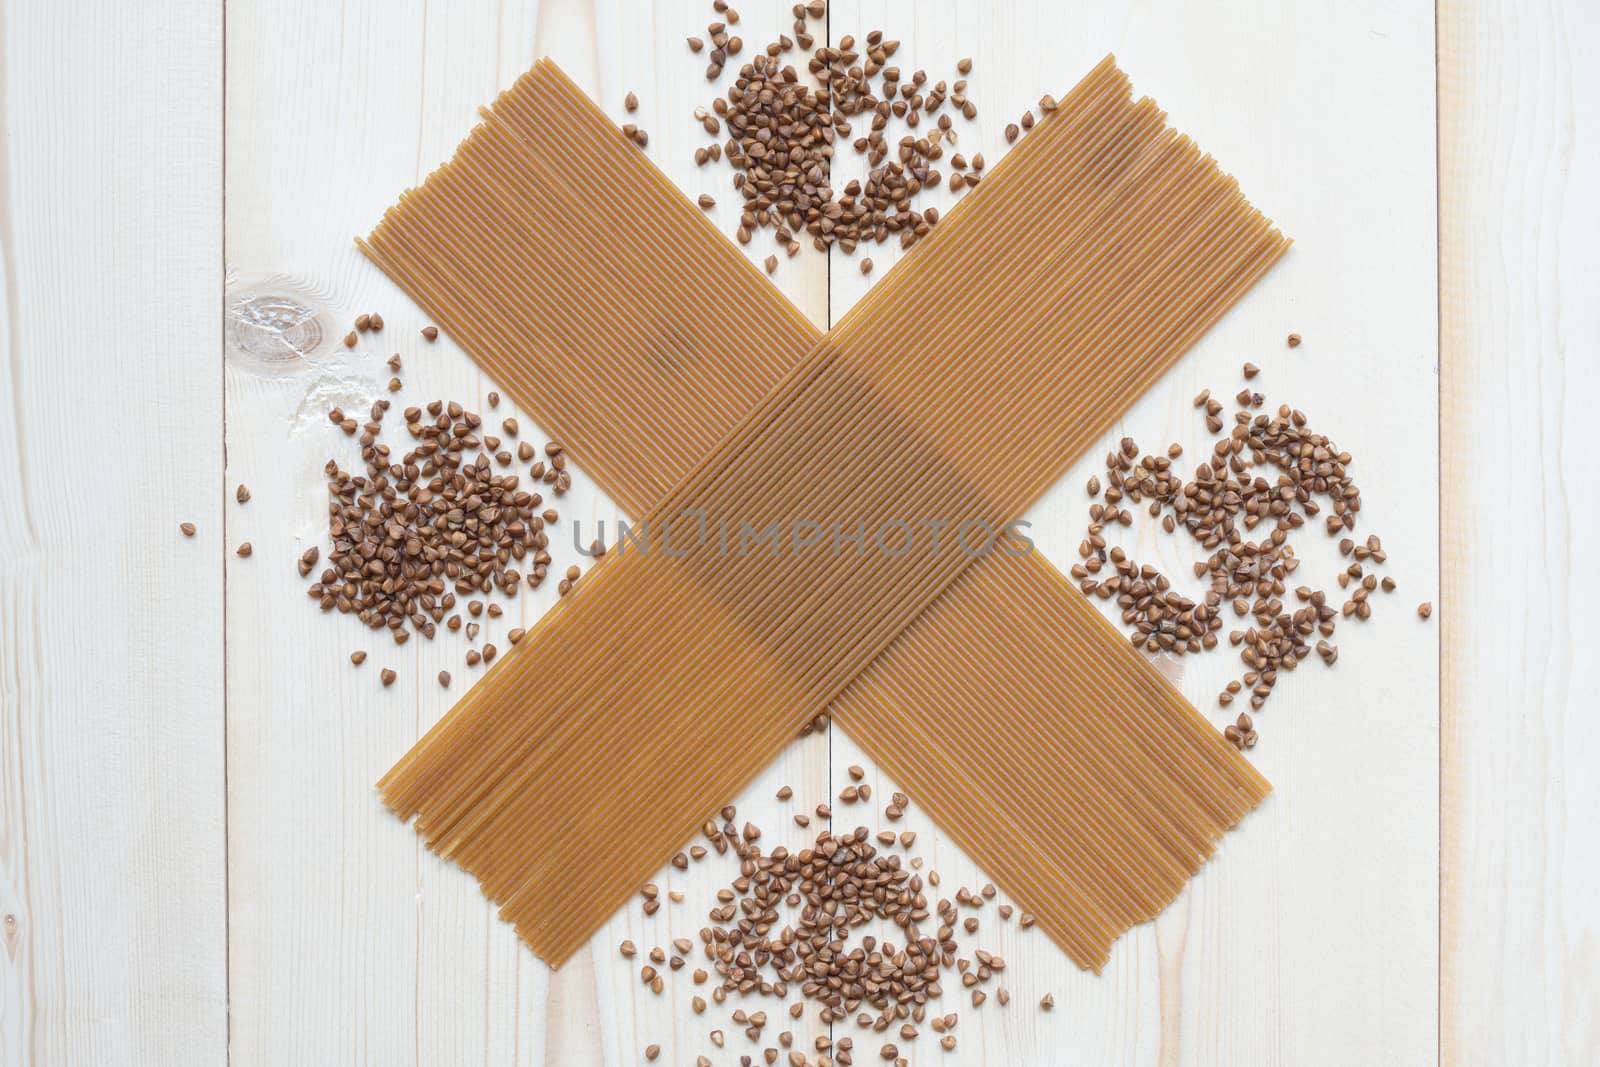 spaghetti made from buckwheat on a wooden table.